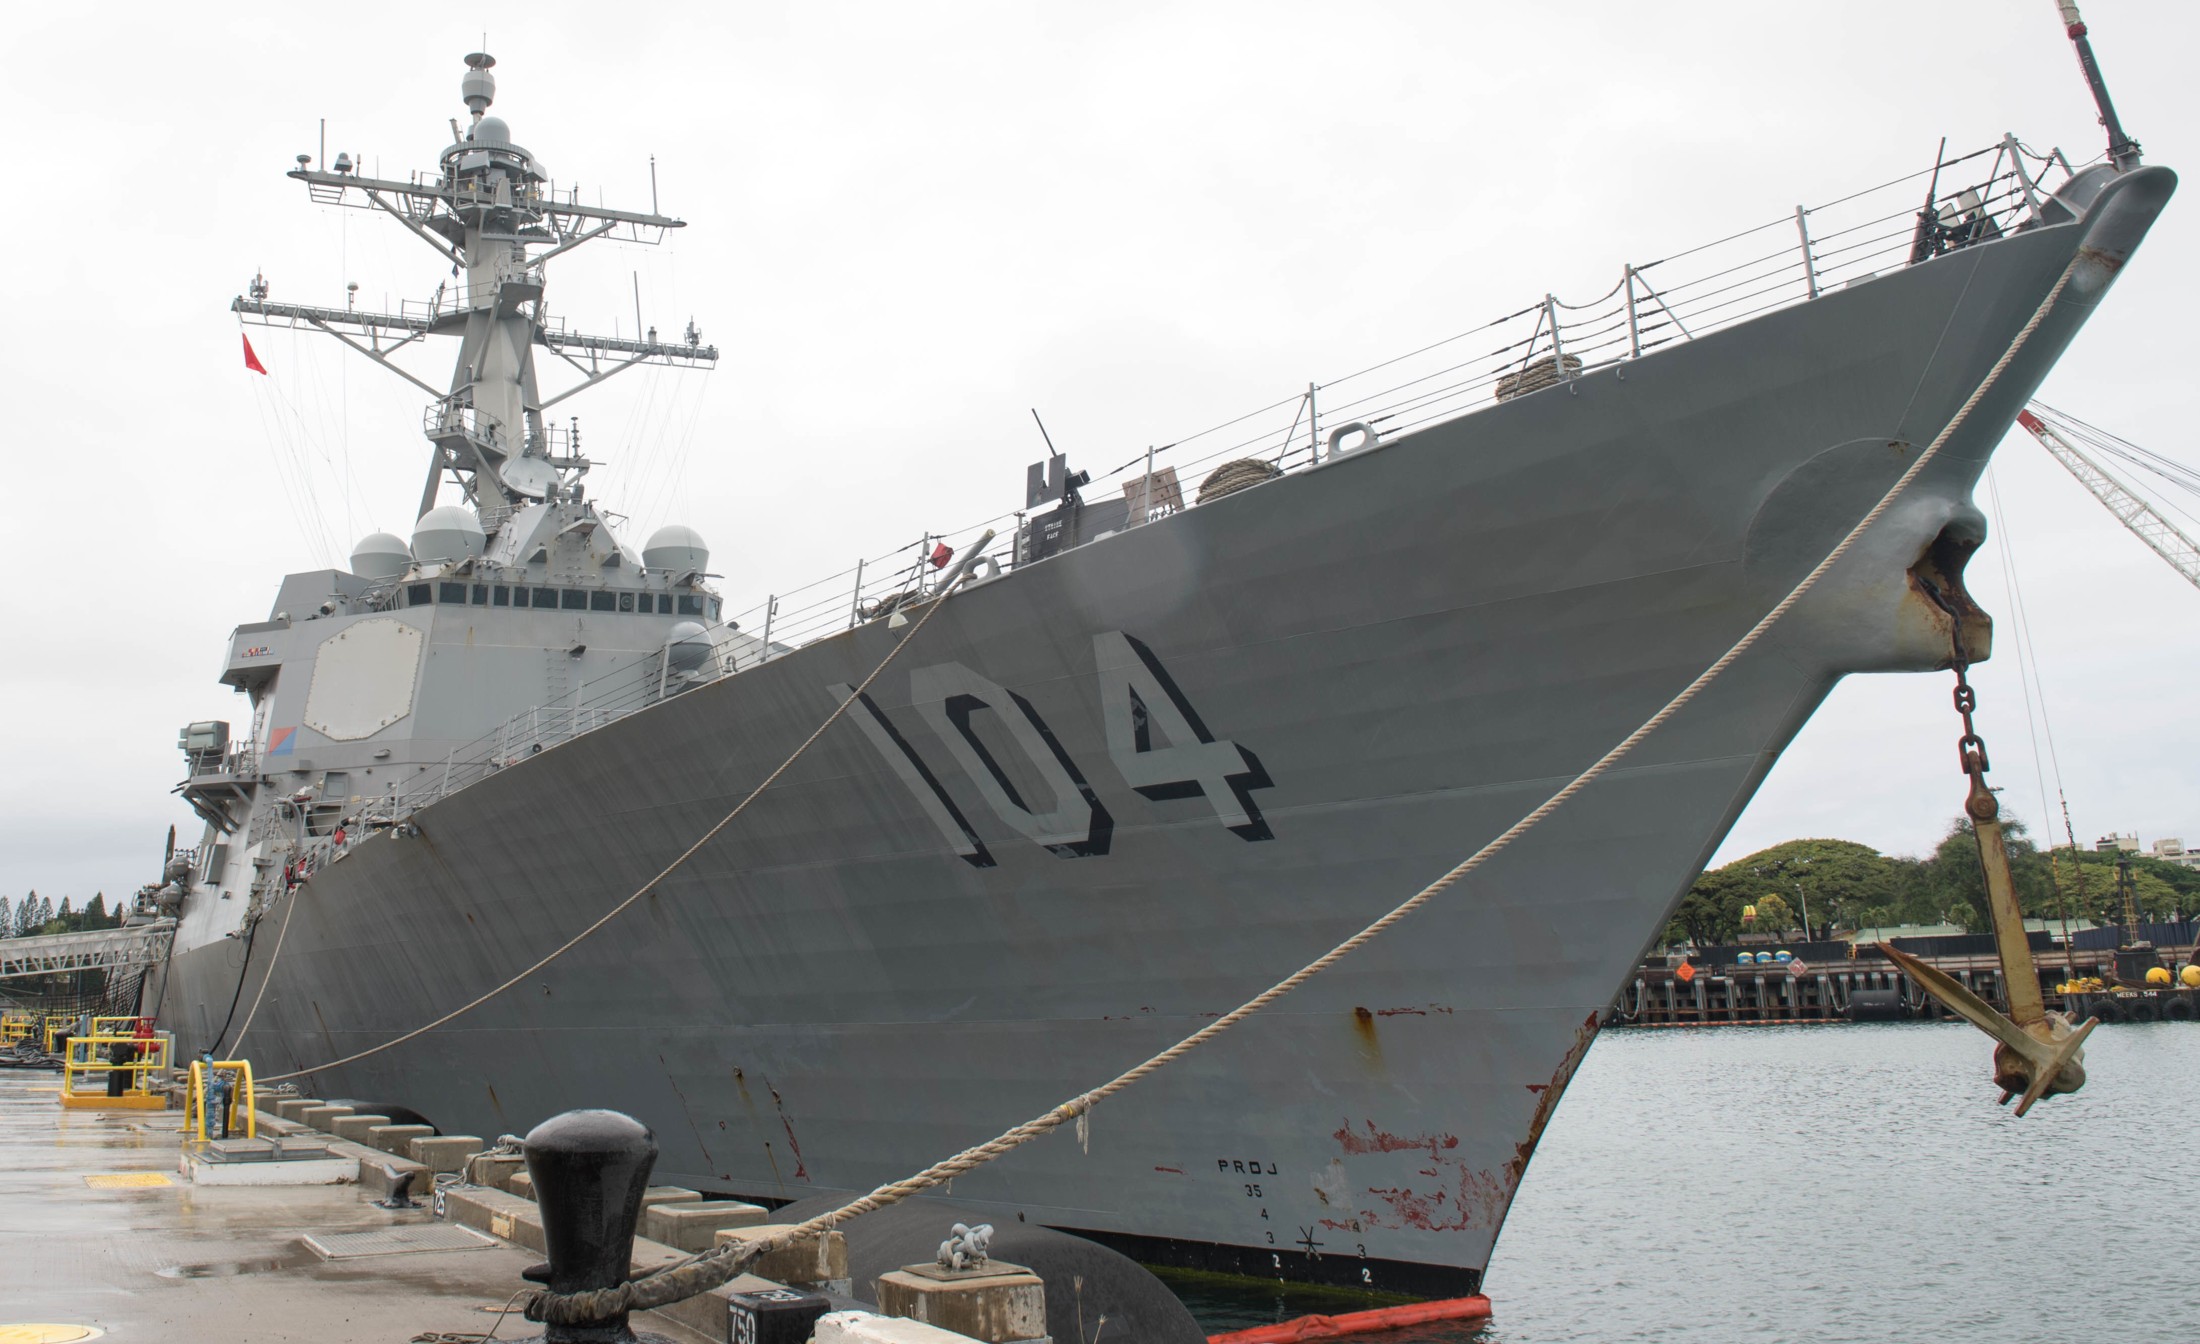 ddg-104 uss sterett arleigh burke class guided missile destroyer aegis us navy joint base pearl harbor hickam hawaii 54